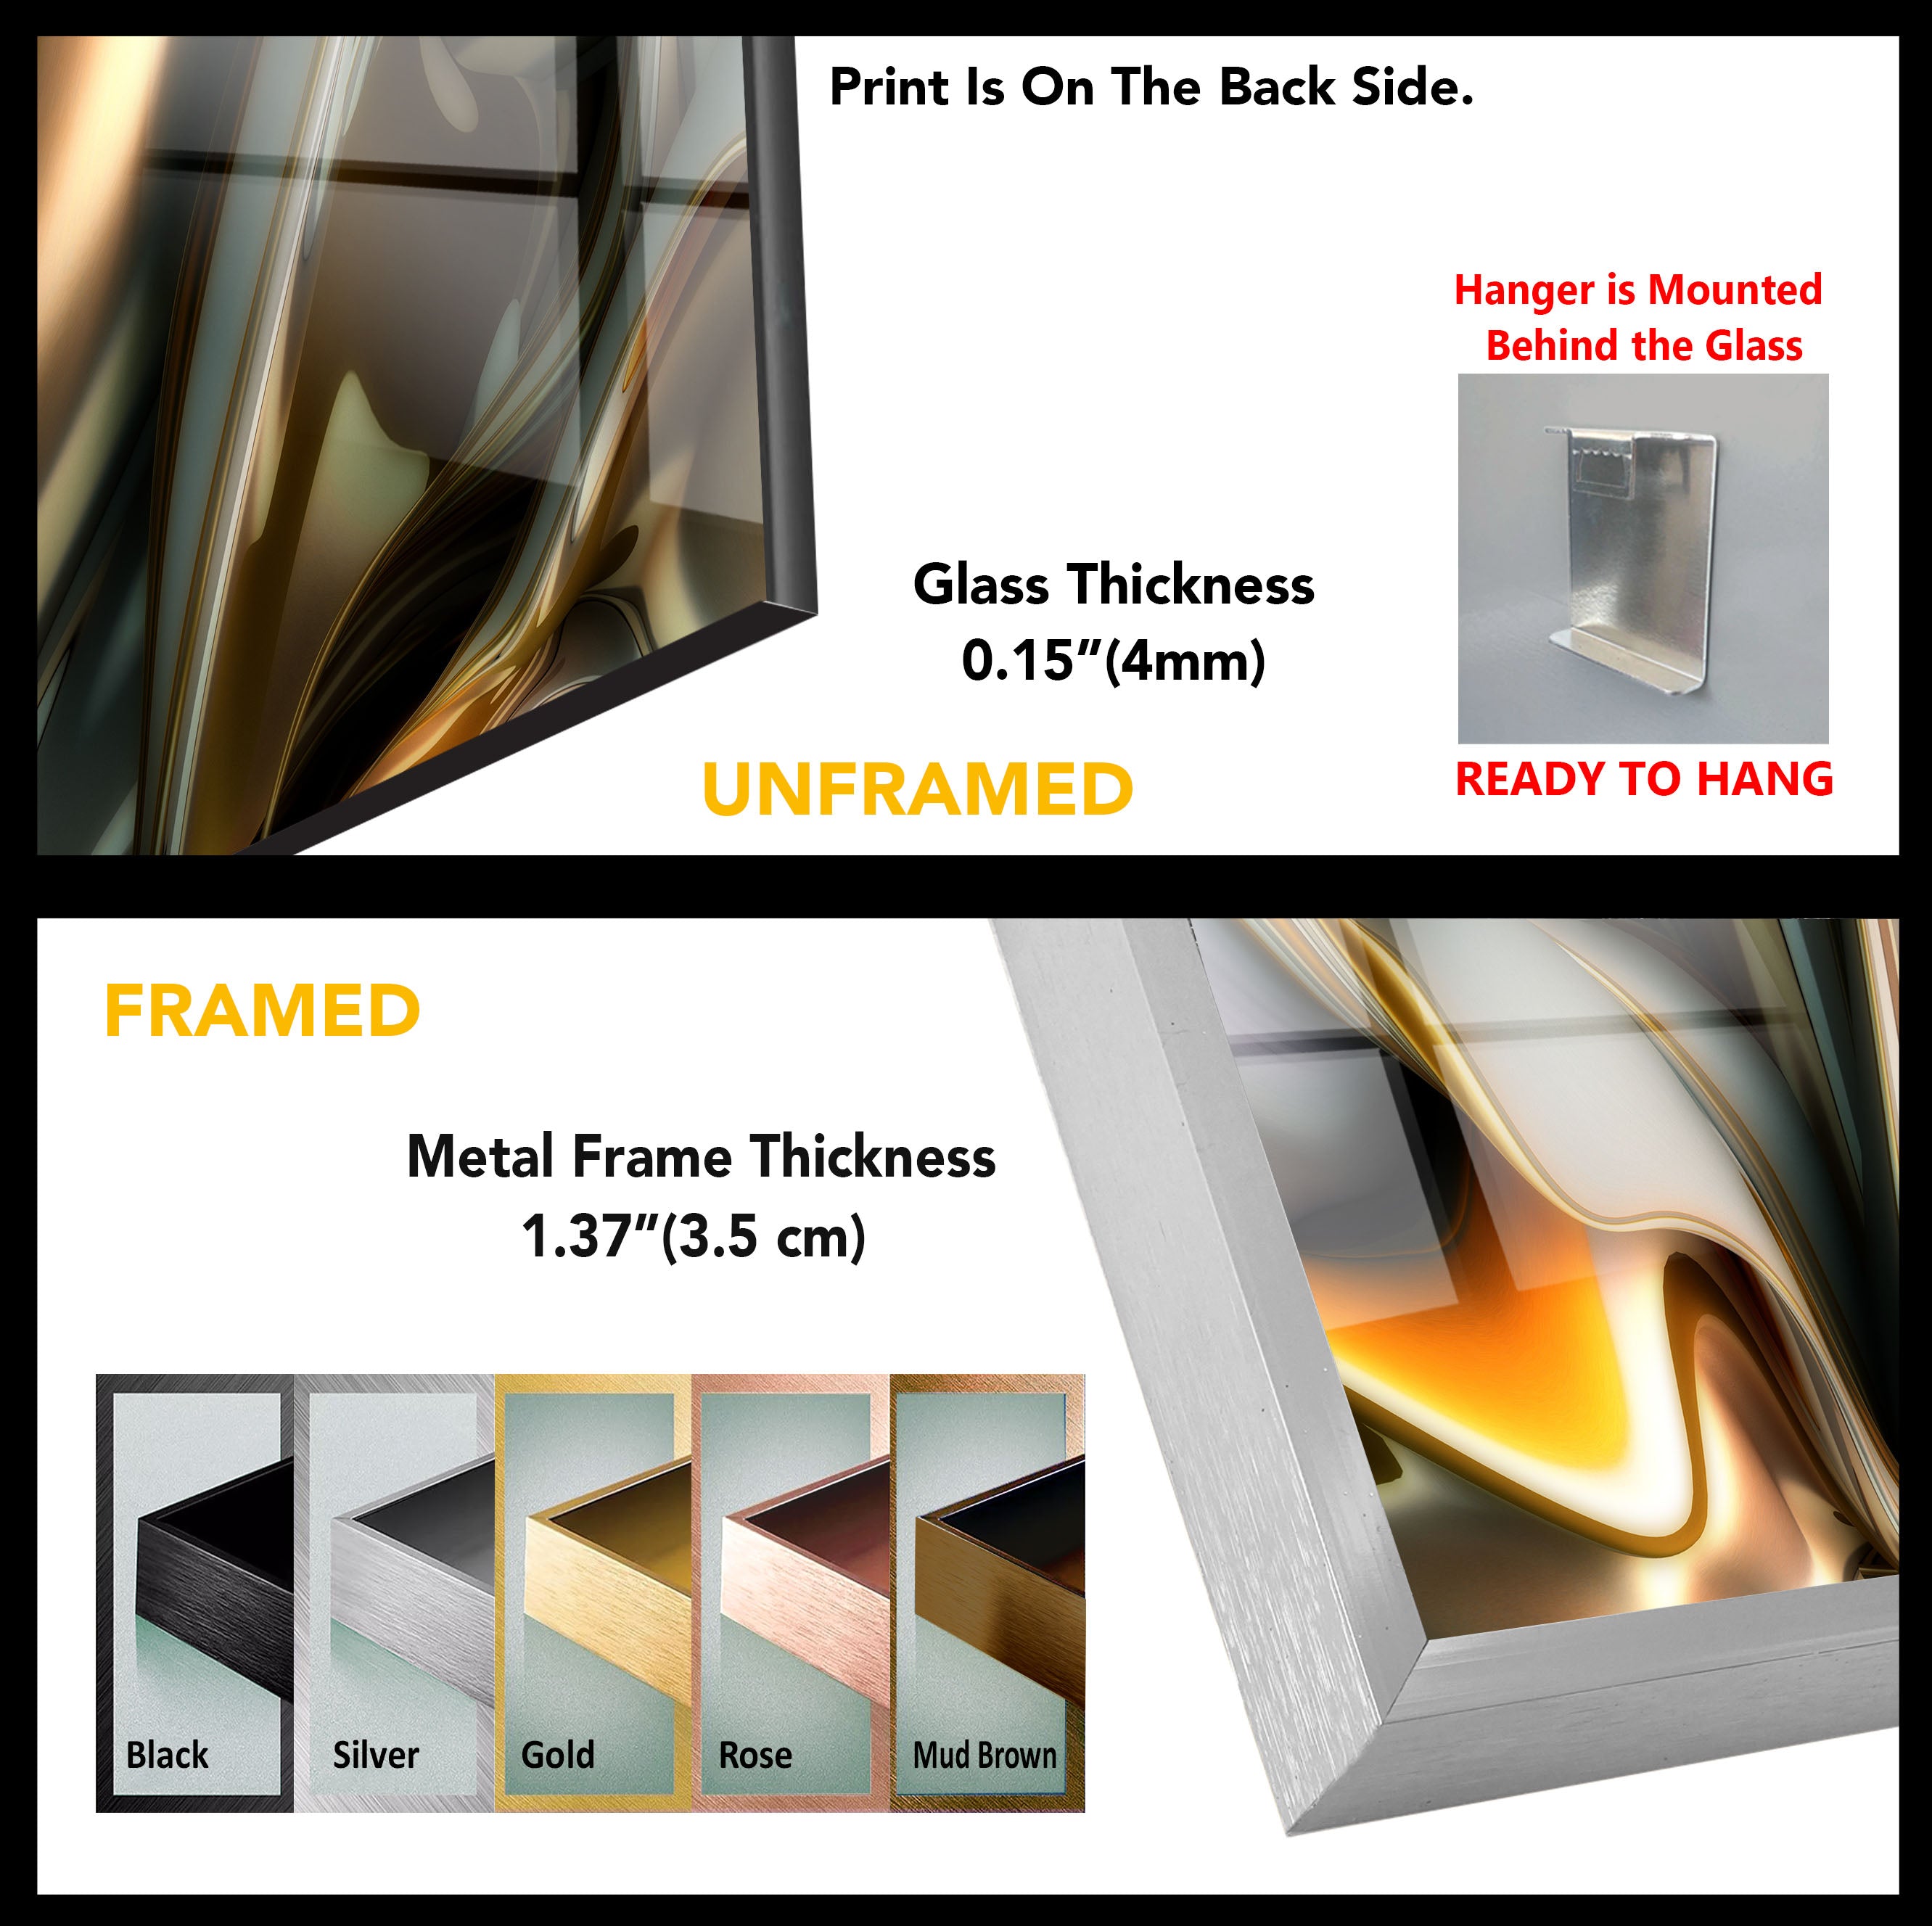 3D Illustration Abstract Tempered Glass Wall Art